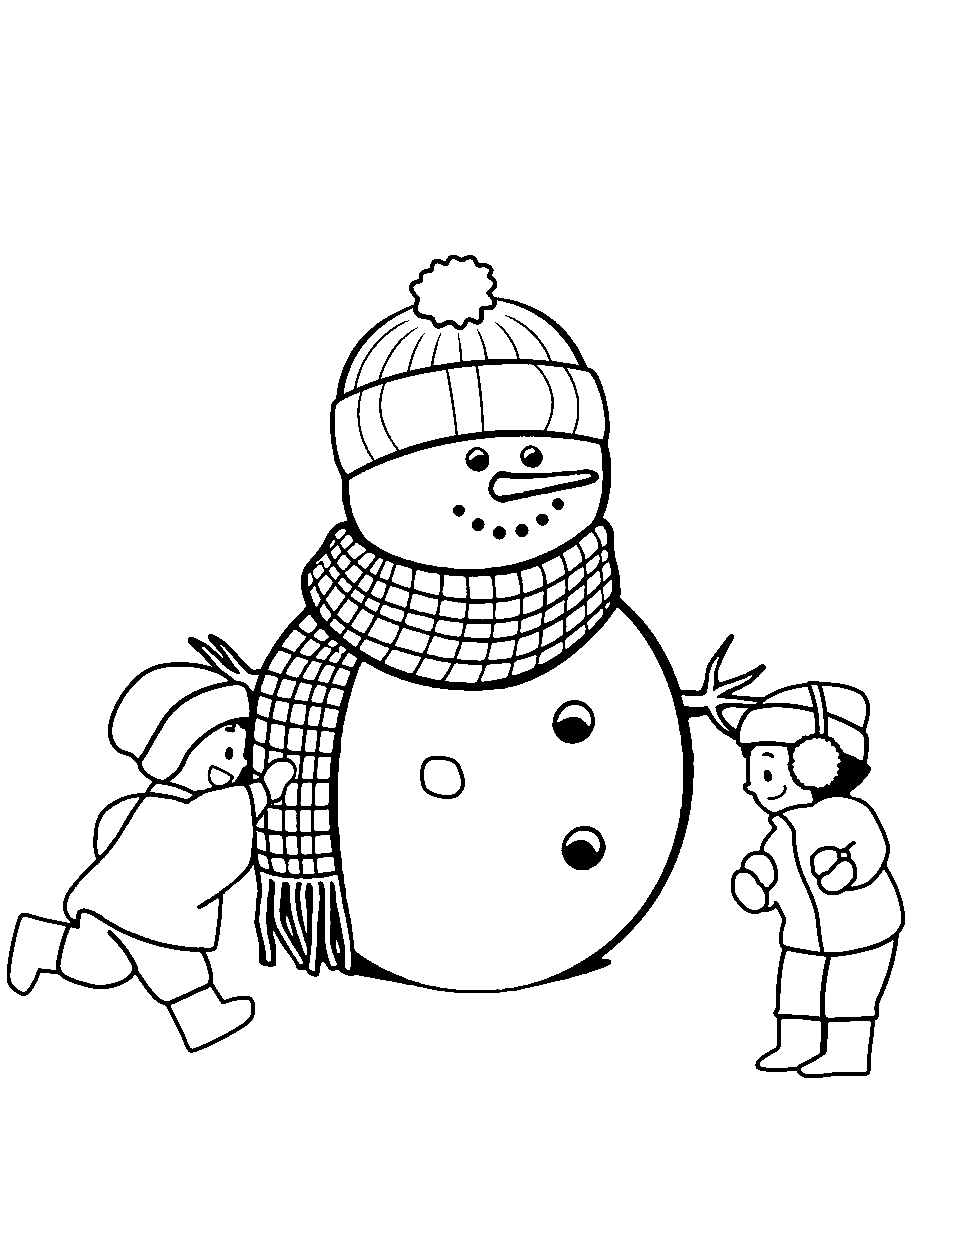 Snowball Fight with a Snowman Coloring Page - Children having a snowball fight around a snowman.